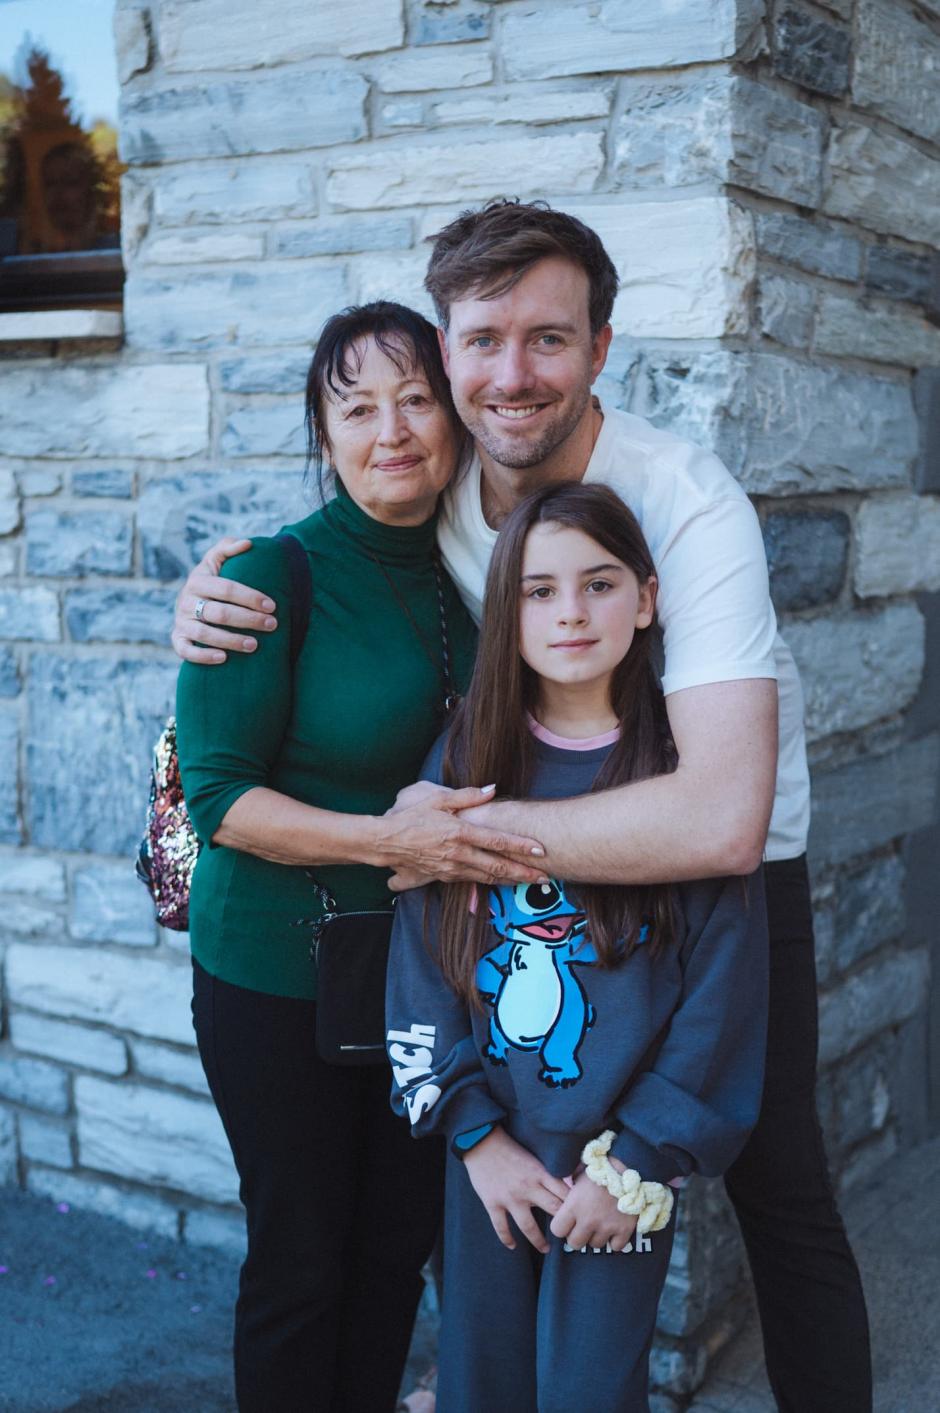 Max Lowe with the two central characters of “Camp Courage” Milana and Olga who are living in Solvakia, made refugees by the Russian war in Ukraine.